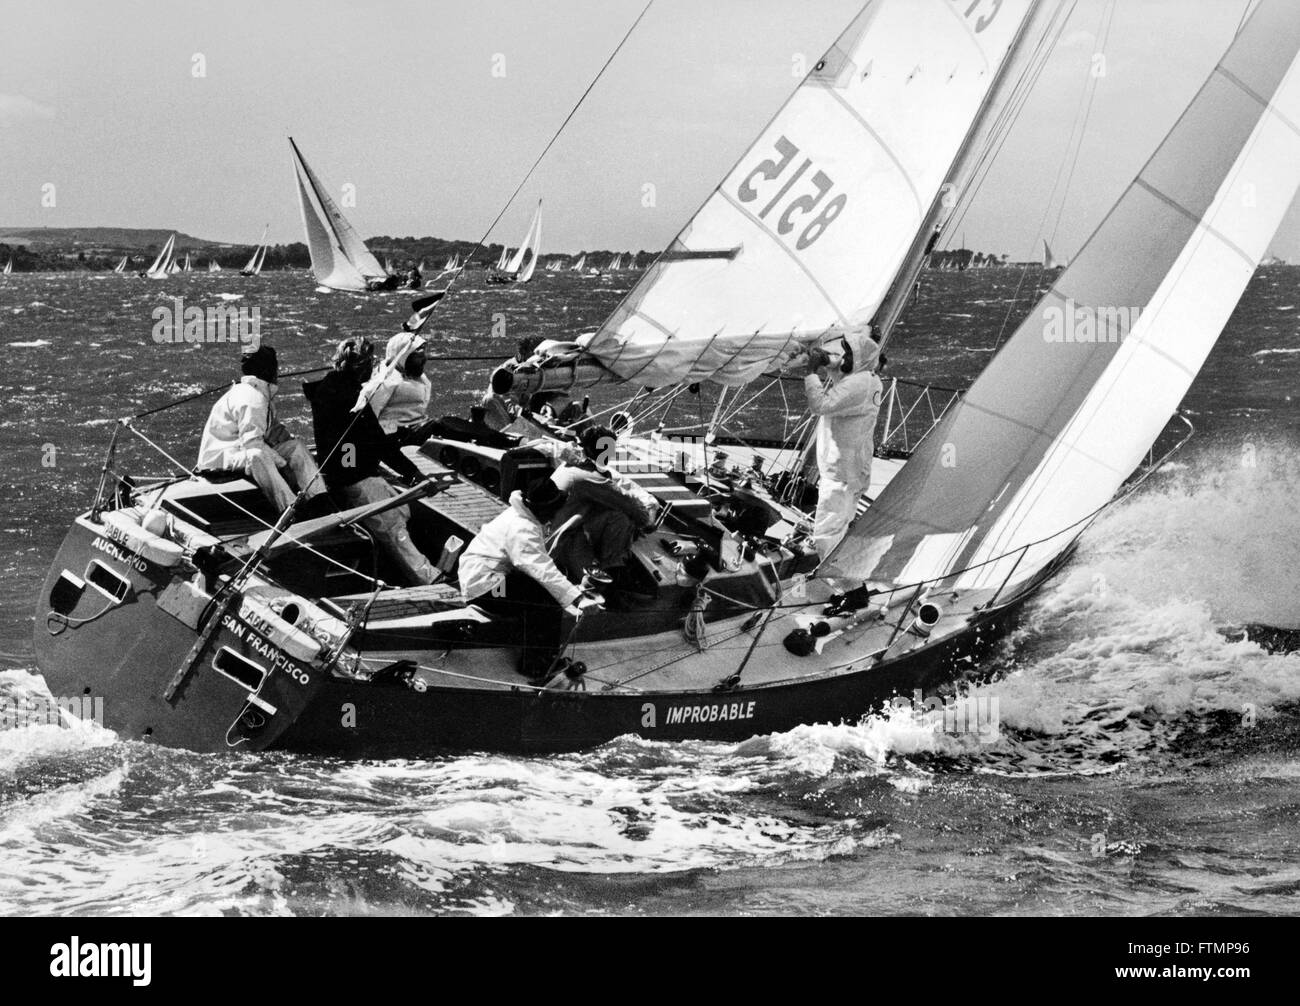 AJAX NEWS PHOTOS. 1971. SOLENT, ENGLAND. - FASTNET RACE - ADMIRAL'S CUP - IMPROBABLE (USA) AMERICAN ADMIRAL'S CUP TEAM MEMBER STARTING THE 605 MILE FASTNET RACE FROM COWES TO FASTNET ROCK AND PLYMOUTH.   PHOTO:JONATHAN EASTLAND/AJAX  REF;IMPROBABLE ADC 71 Stock Photo